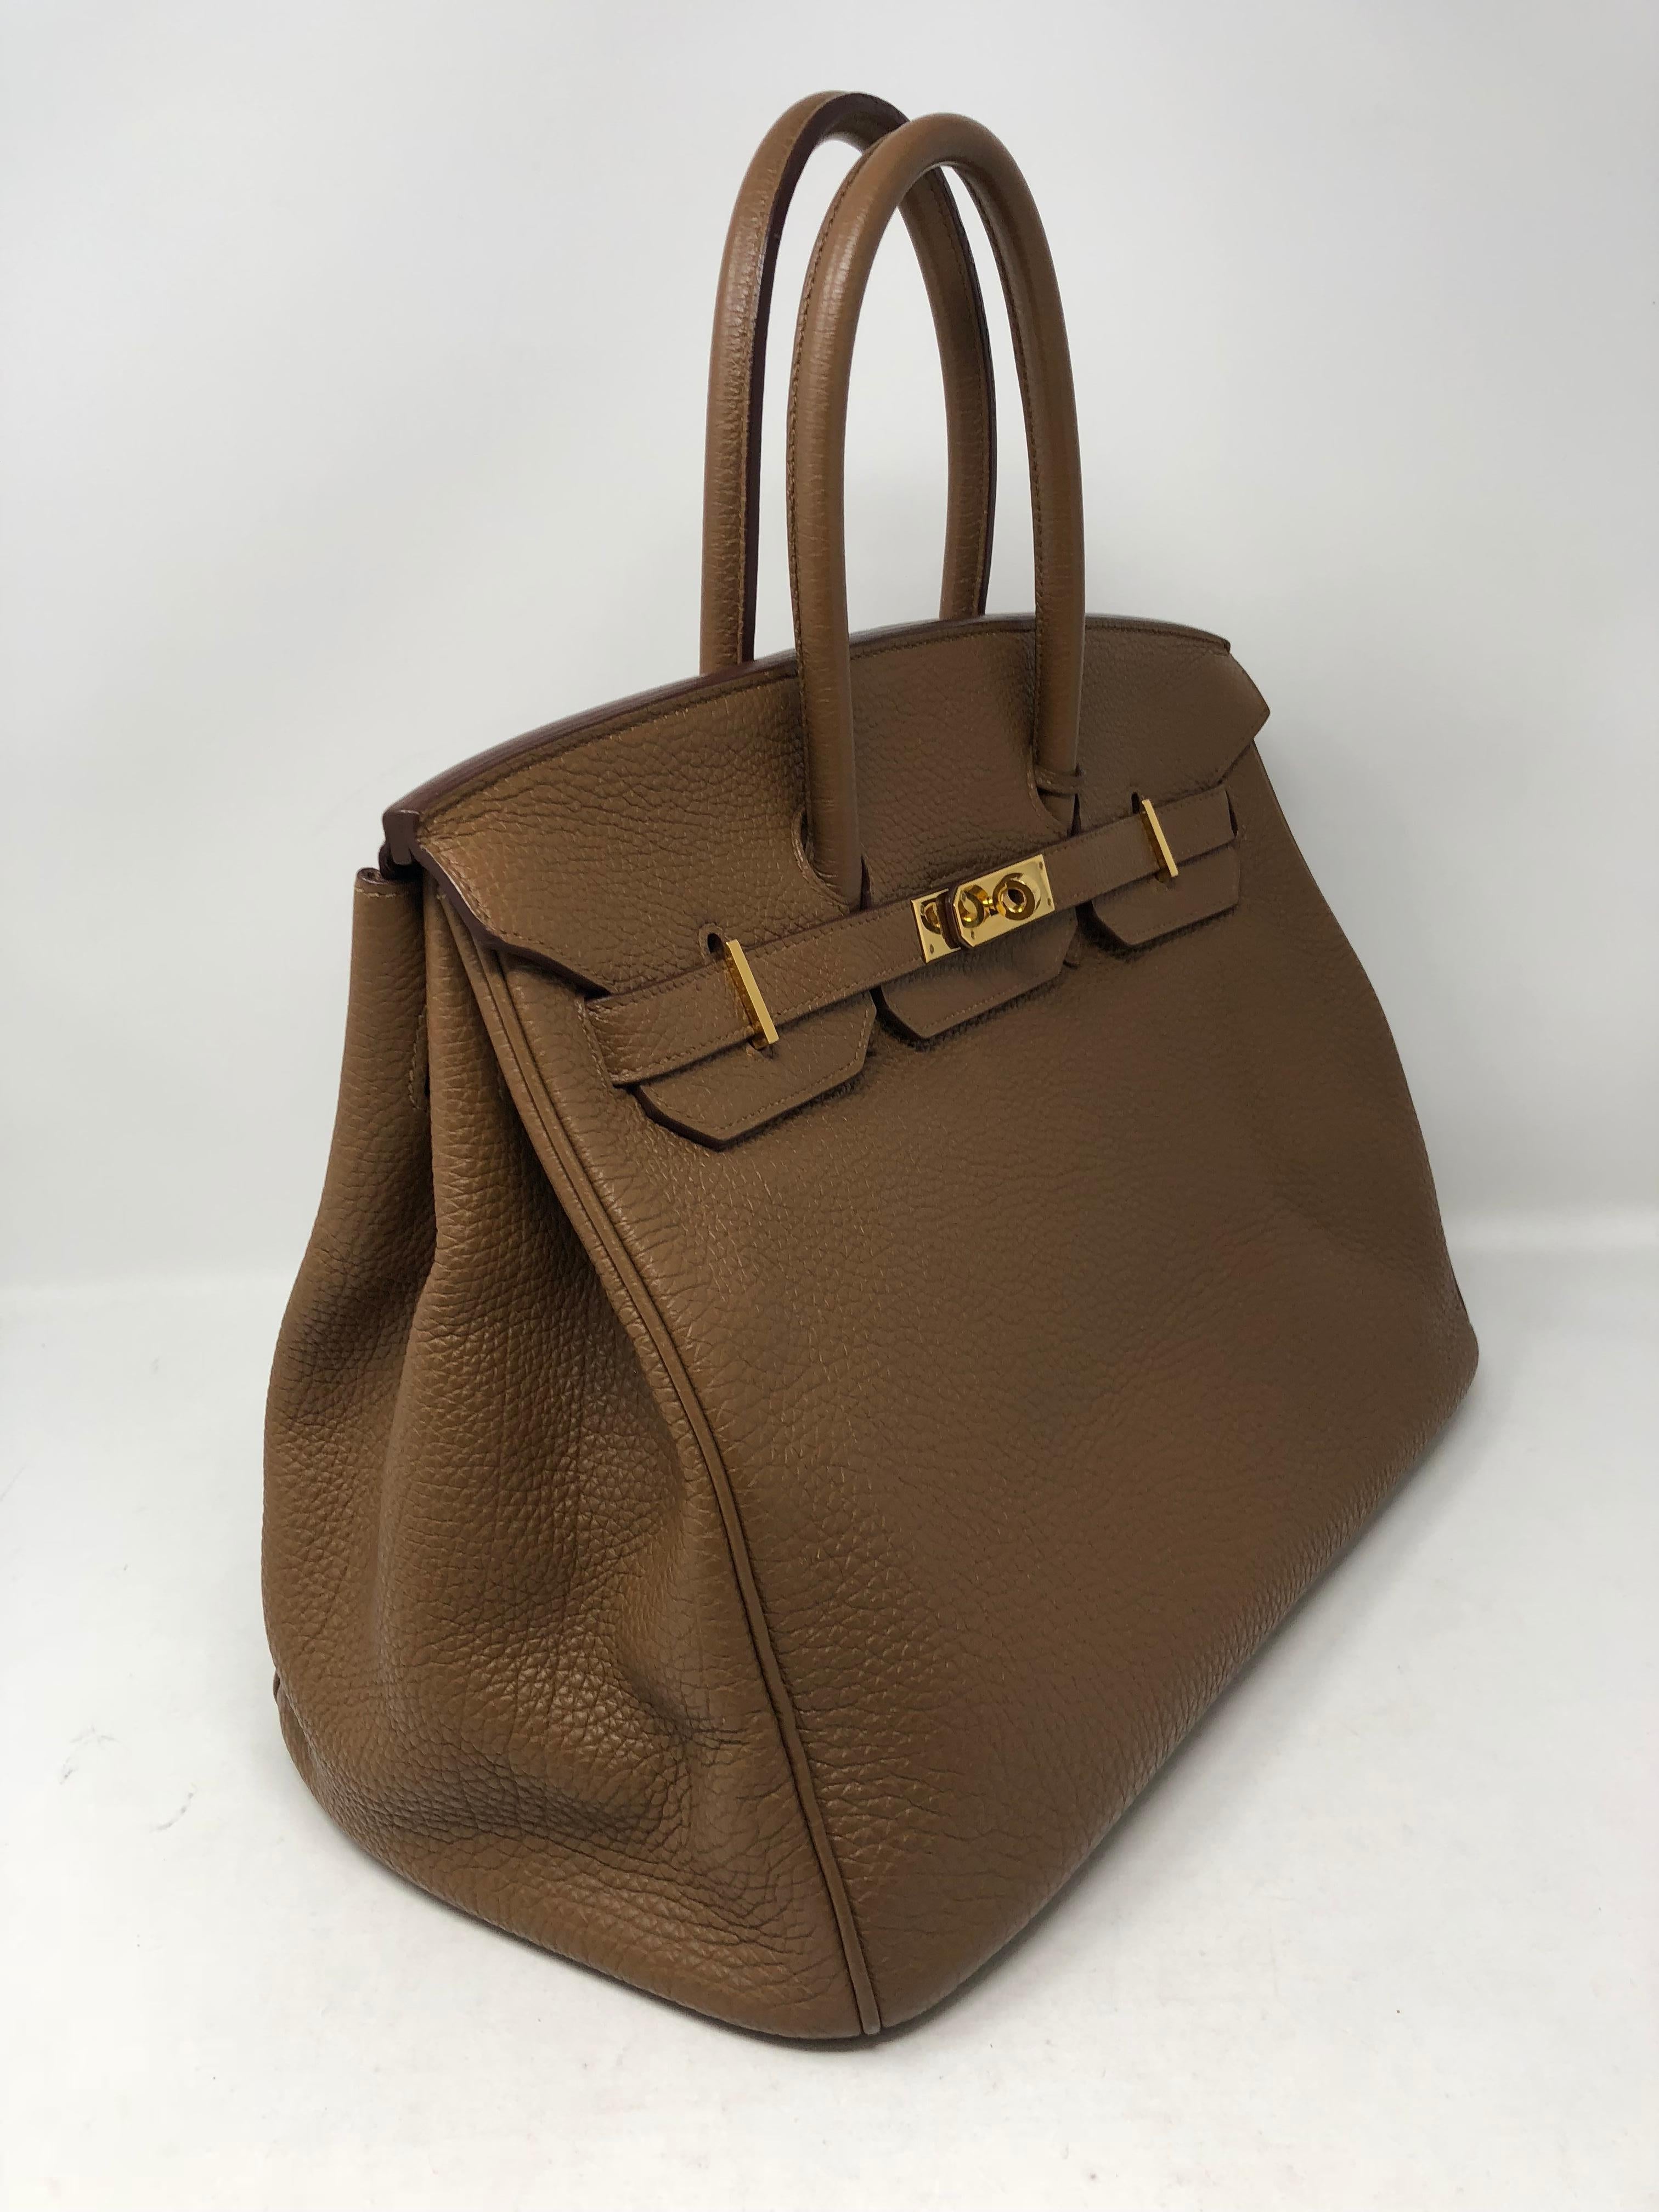 Hermes Birkin 35 Alezan tan color in gold hardware. Togo leather and in good condition. Slight wear on one of the handles. Can be cleaned and restored at Hermes. Bag includes dust cover, clochette, lock and keys. Stamped M square from 2009. 